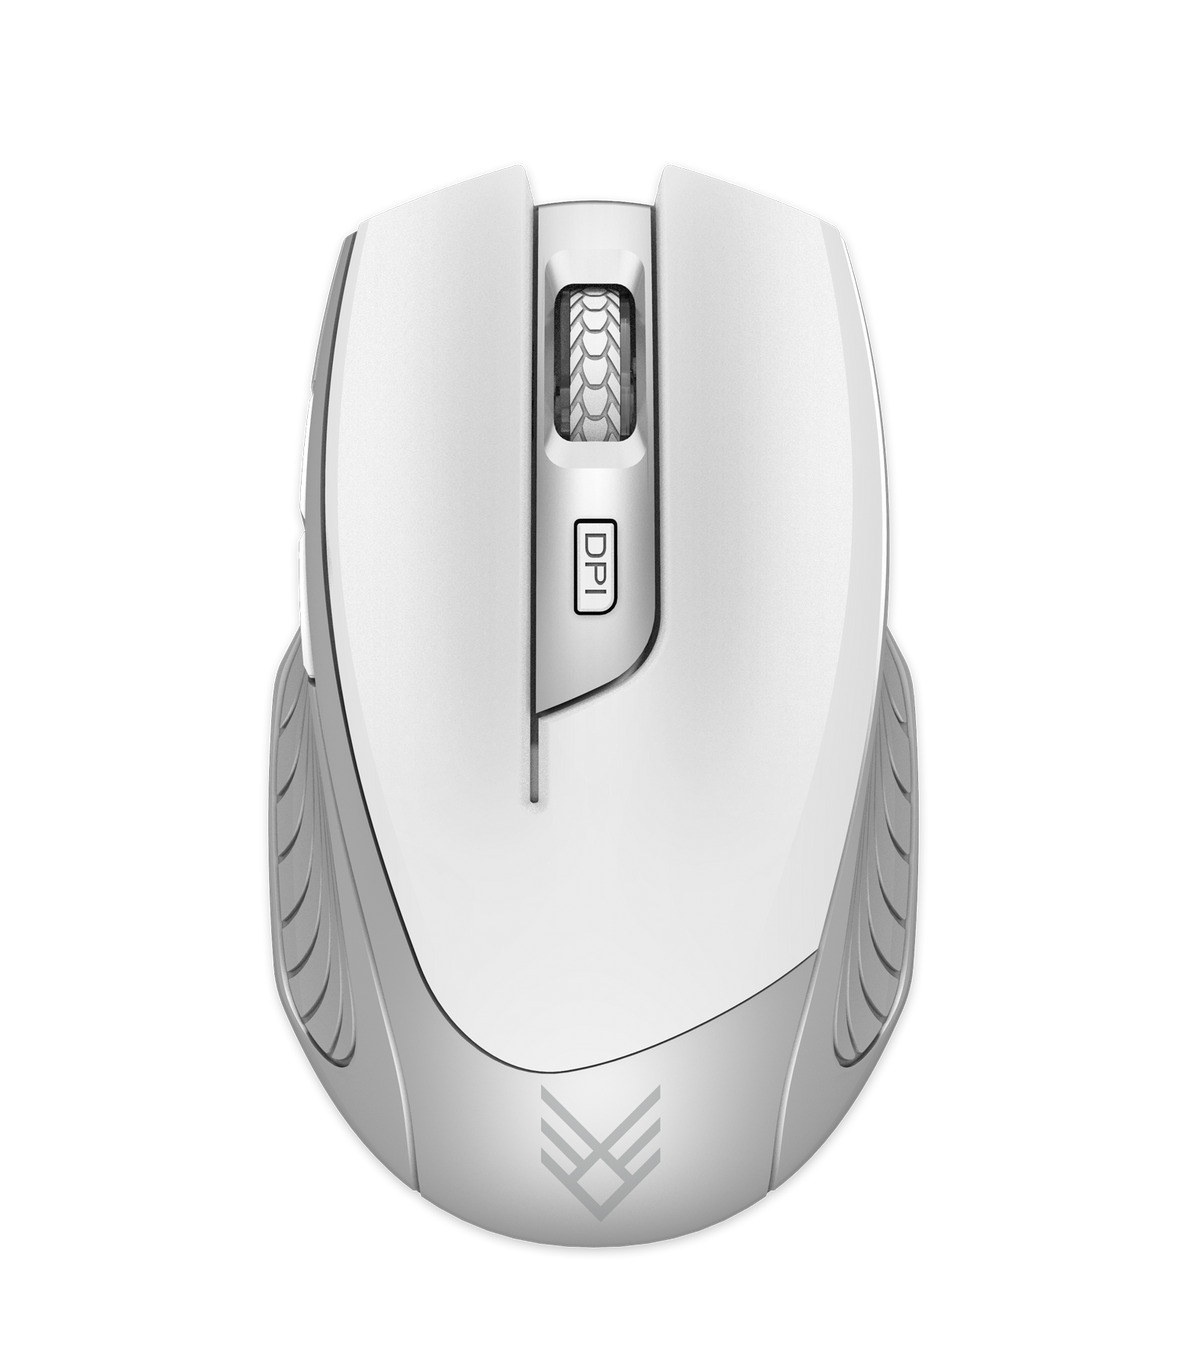 Elevate Pro Wireless Optical Mouse